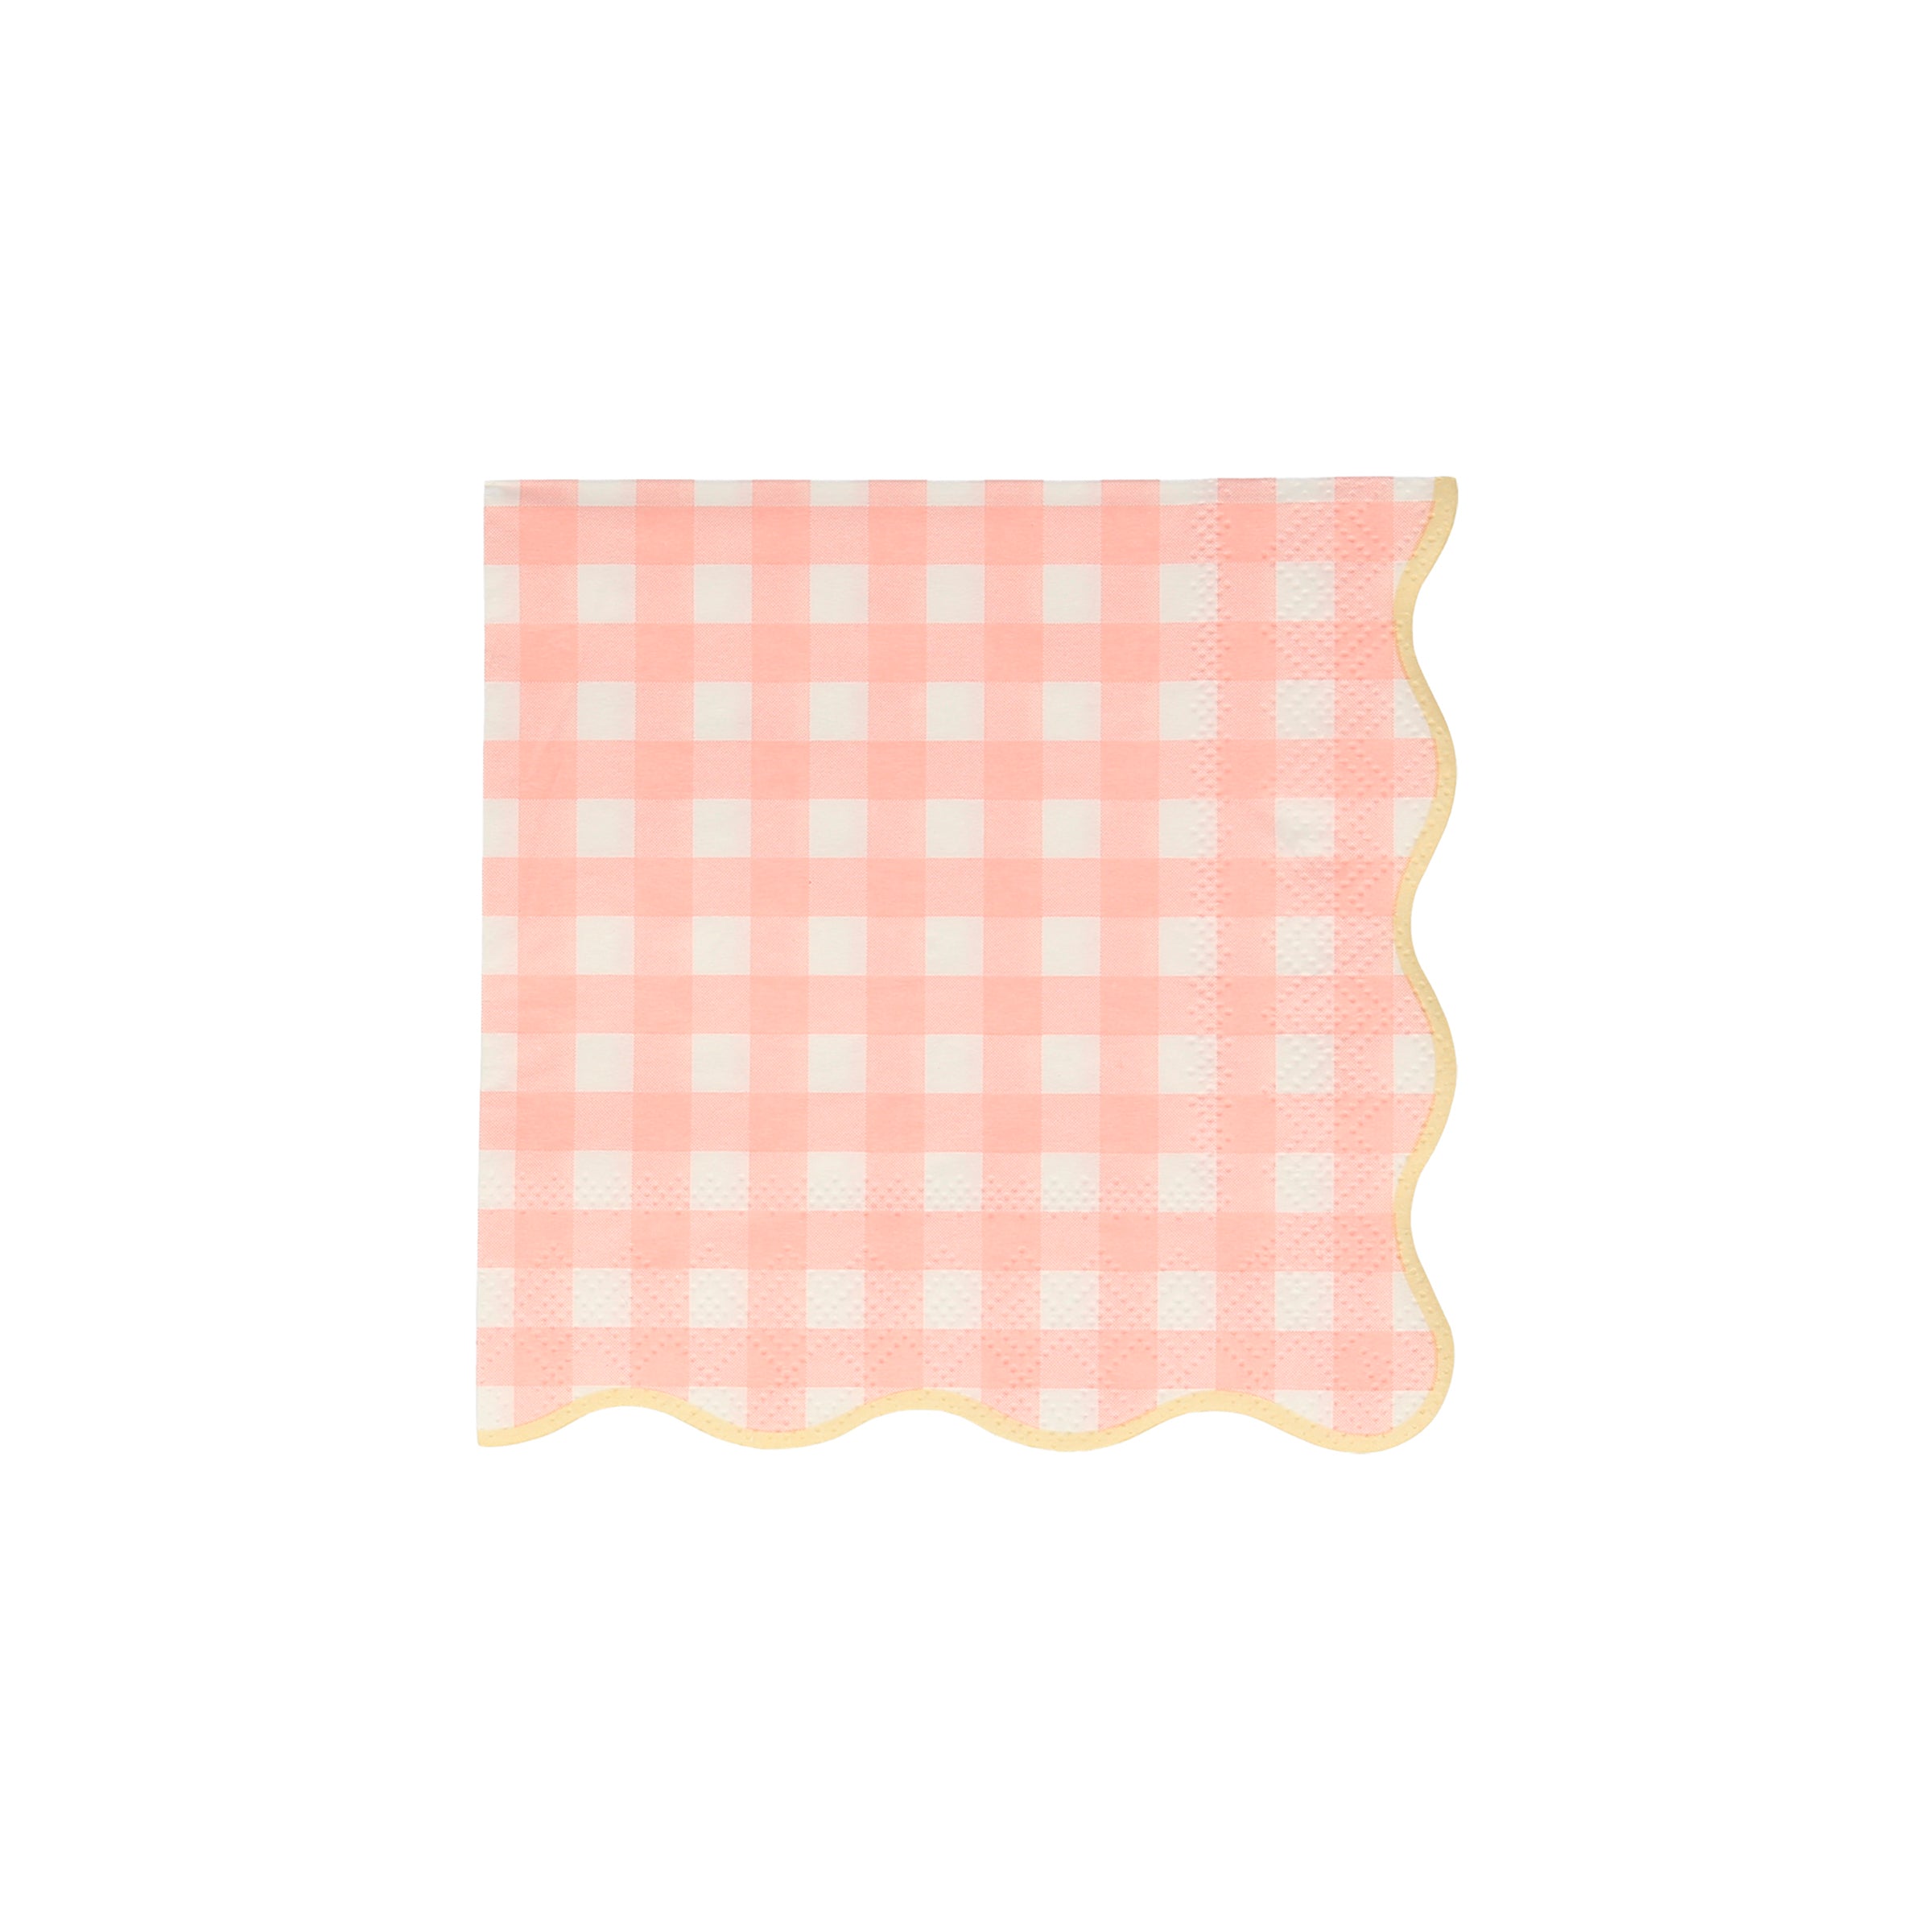 Our paper napkins with a gingham print and scalloped edge will look amazing on your party table.